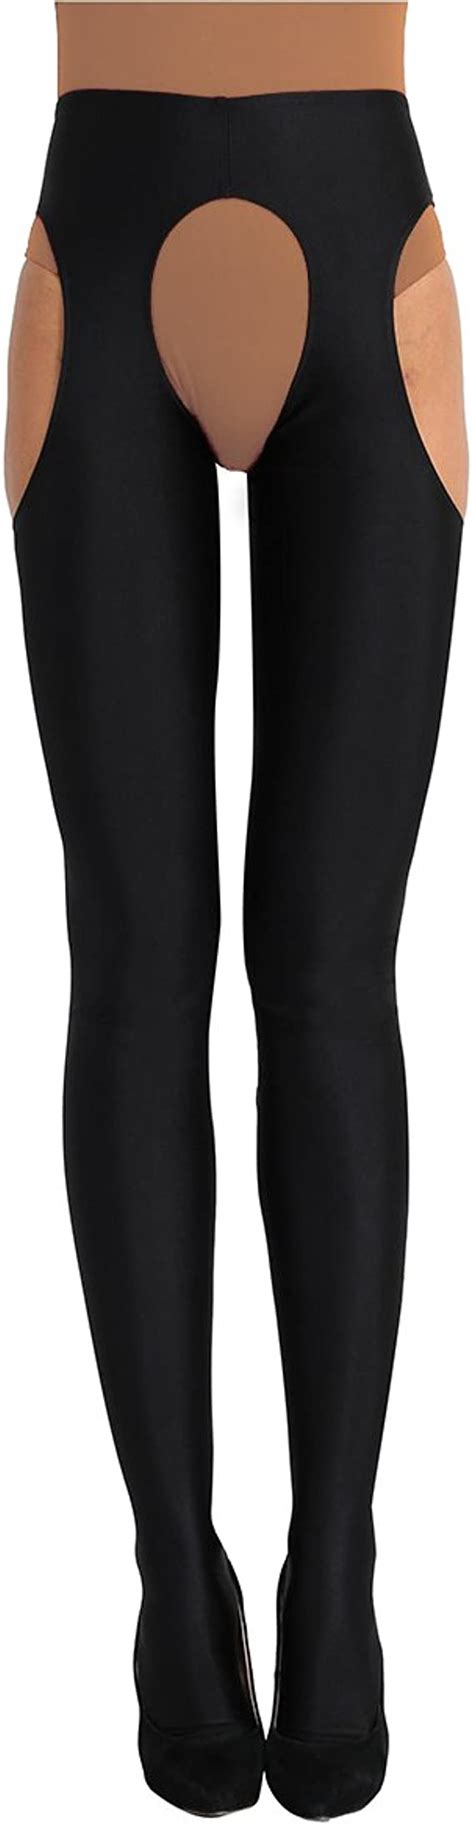 Msemis Women Crotchless Tights Leggings Compression